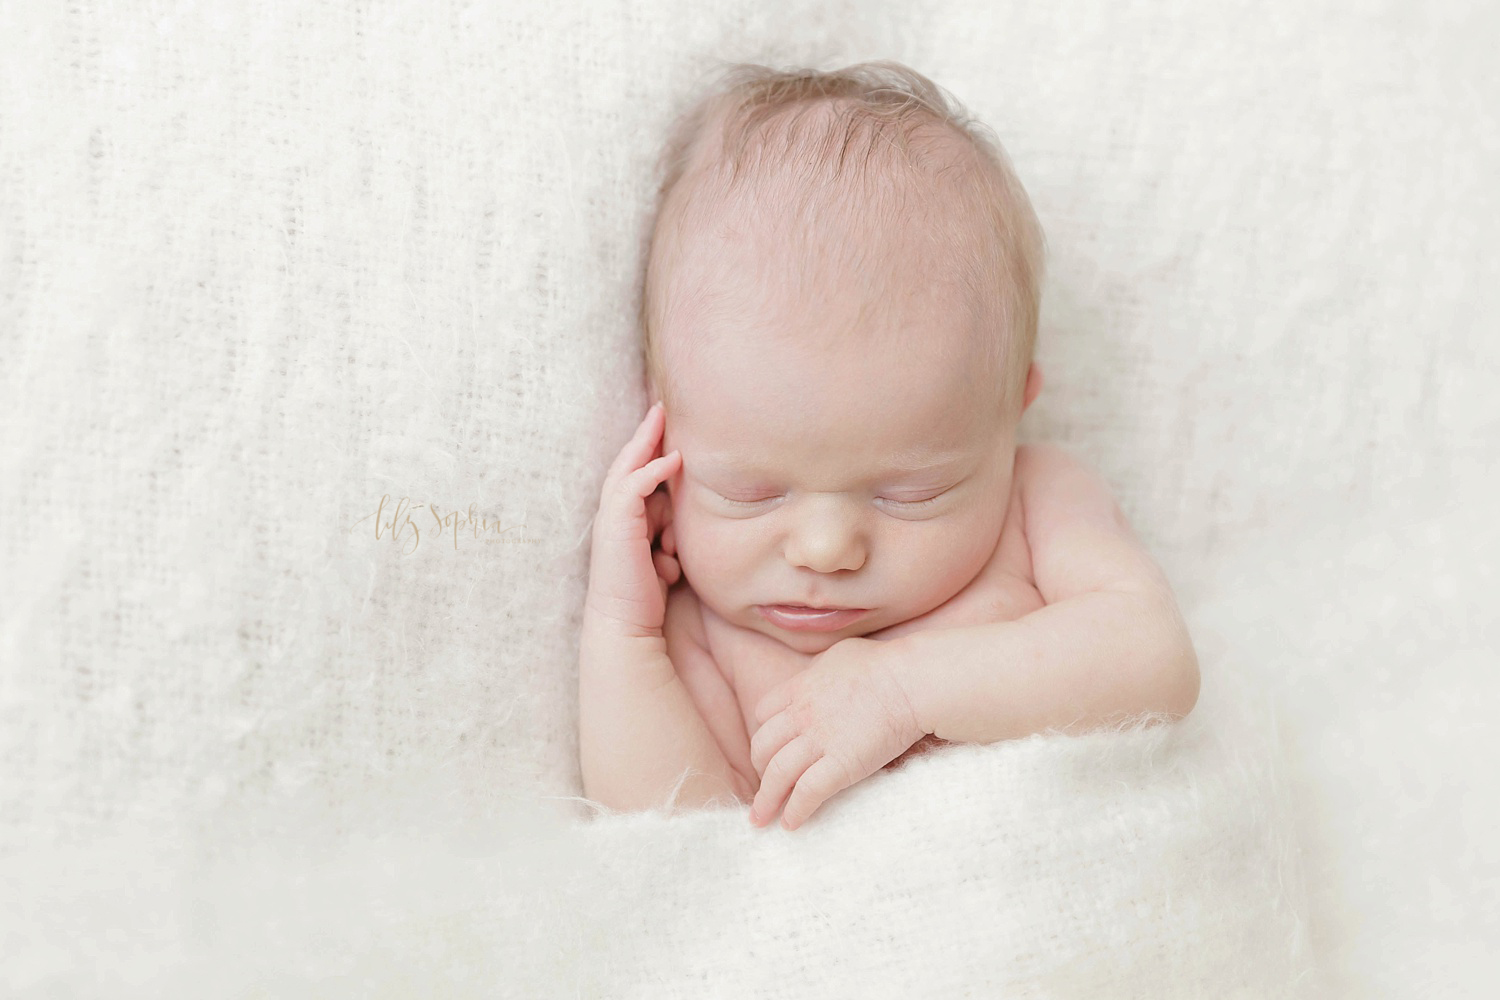 Sleeping newborn baby girl on white blanket with hand on cheek in natural light studio of Lily Sophia Photography located in Atlanta, Georgia